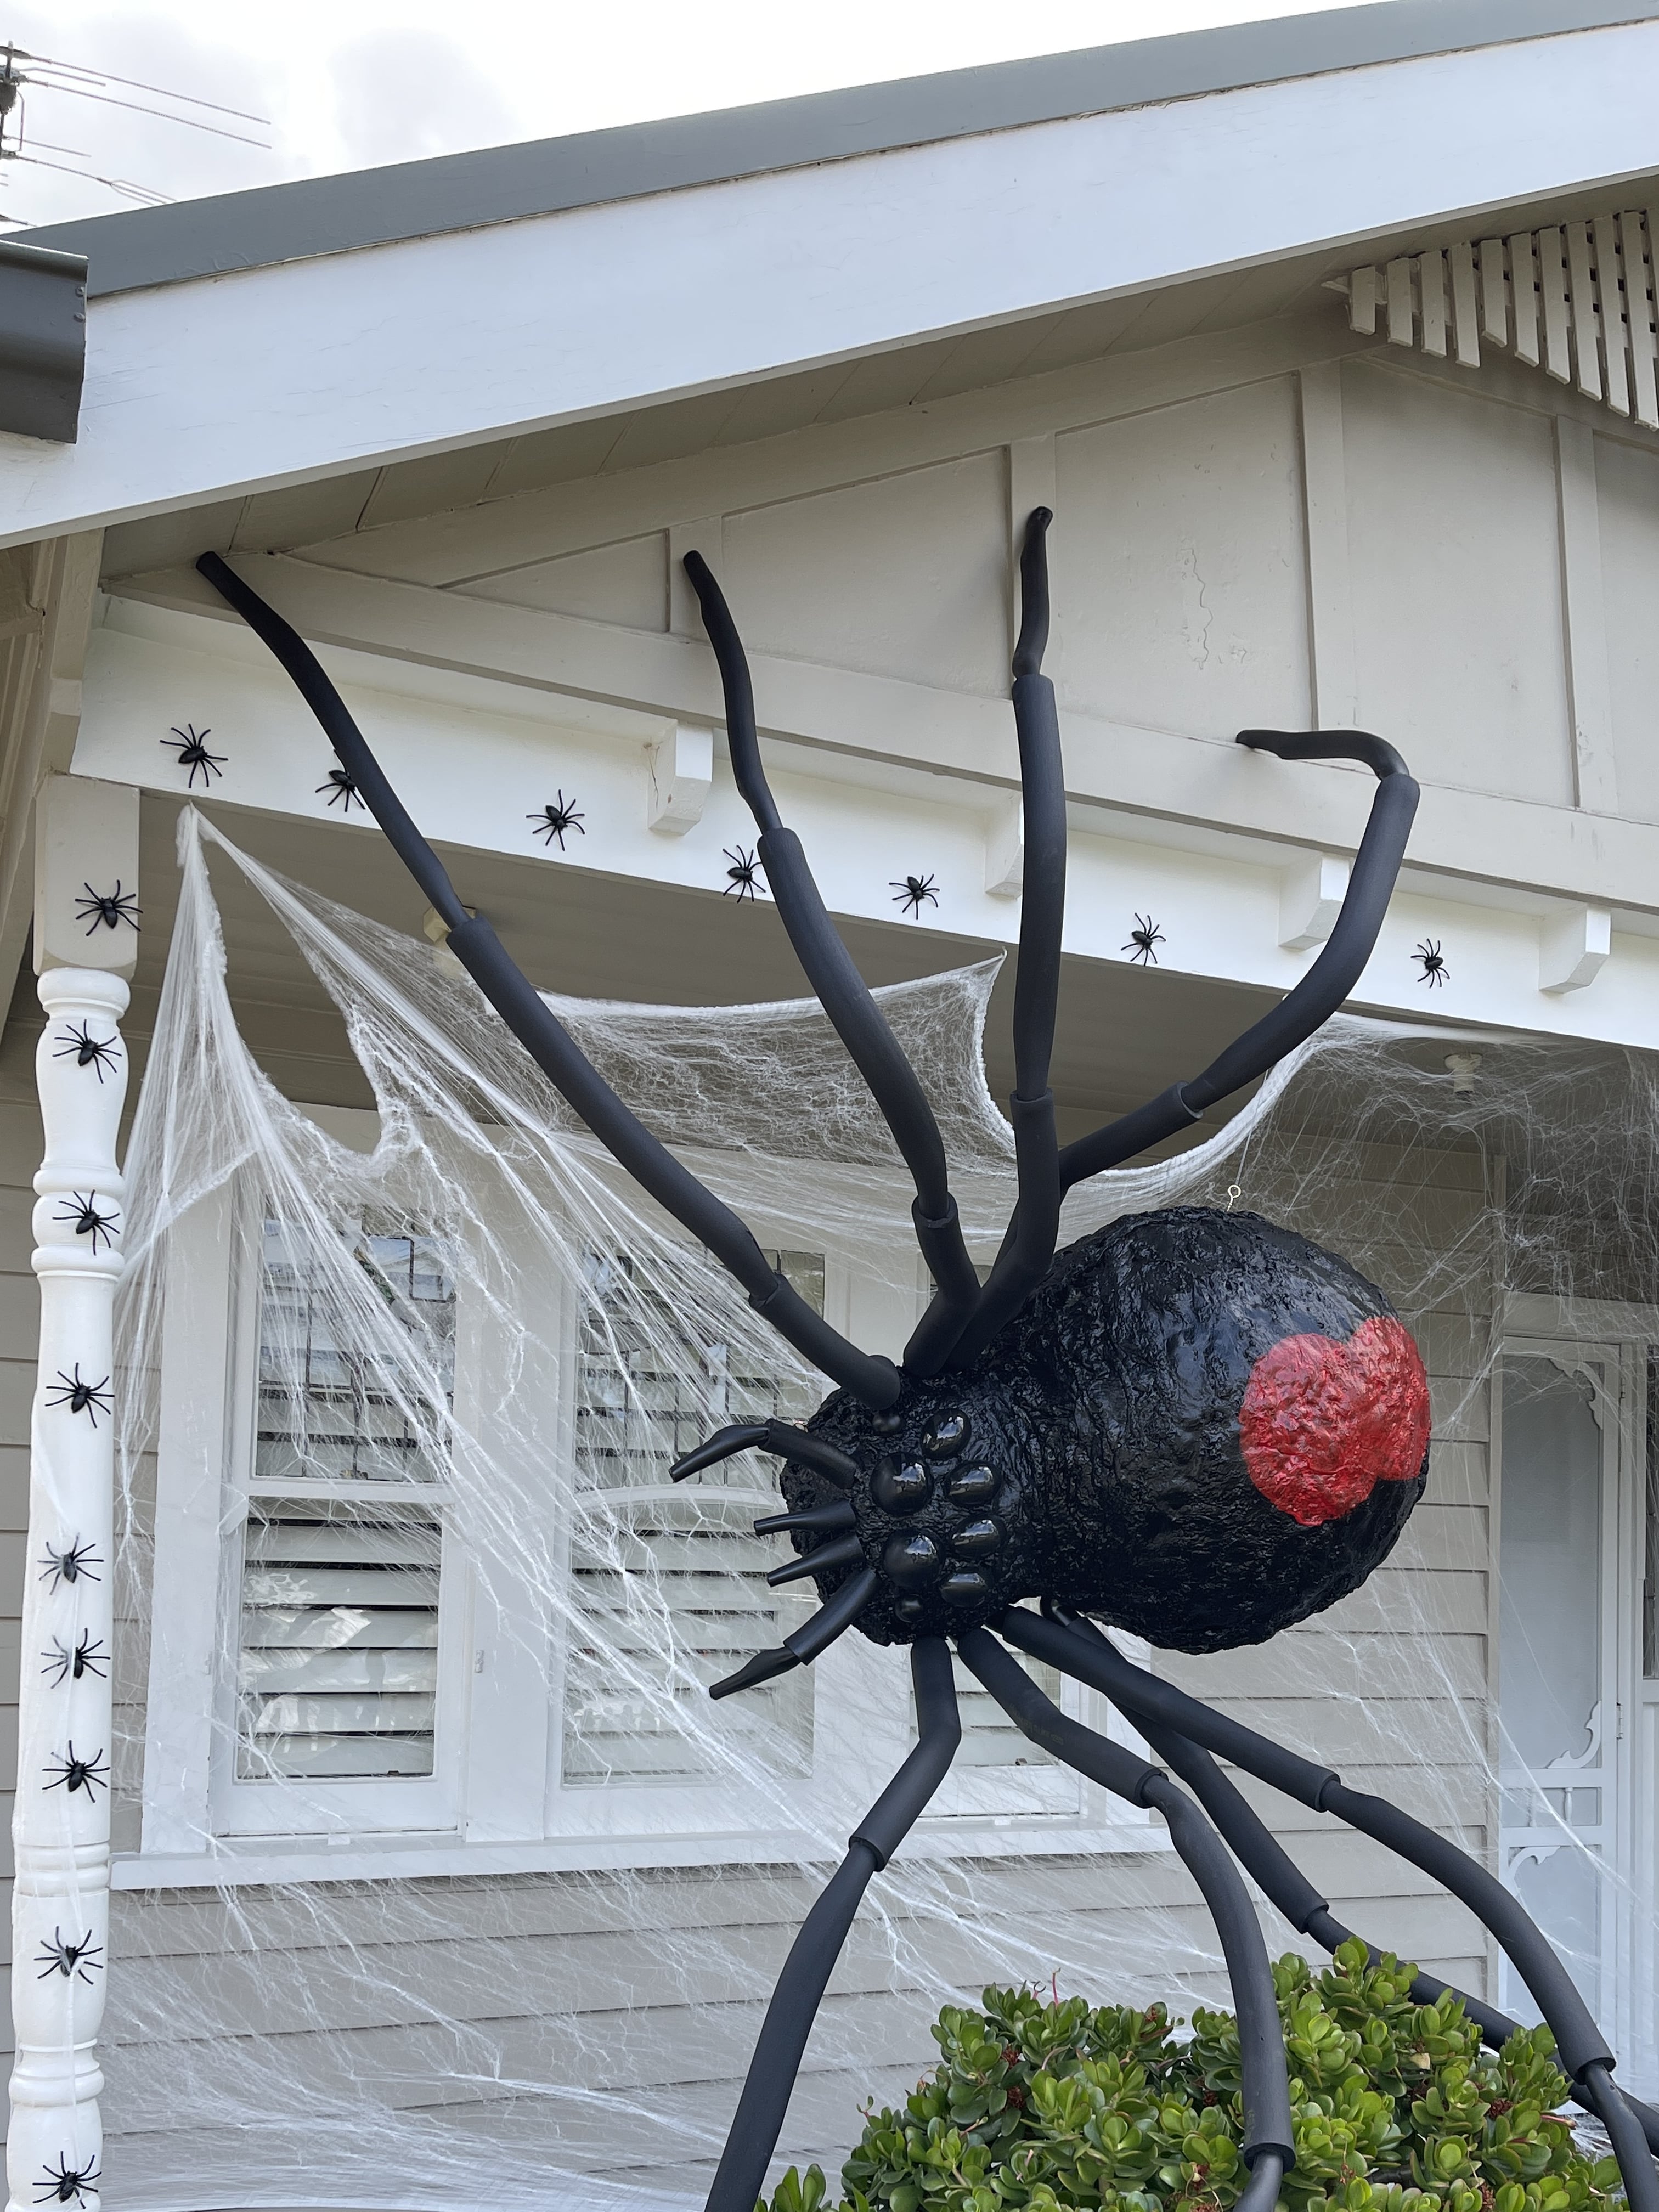 Australian Spider Webs Are The Most Terrifying Thing You Will Ever See